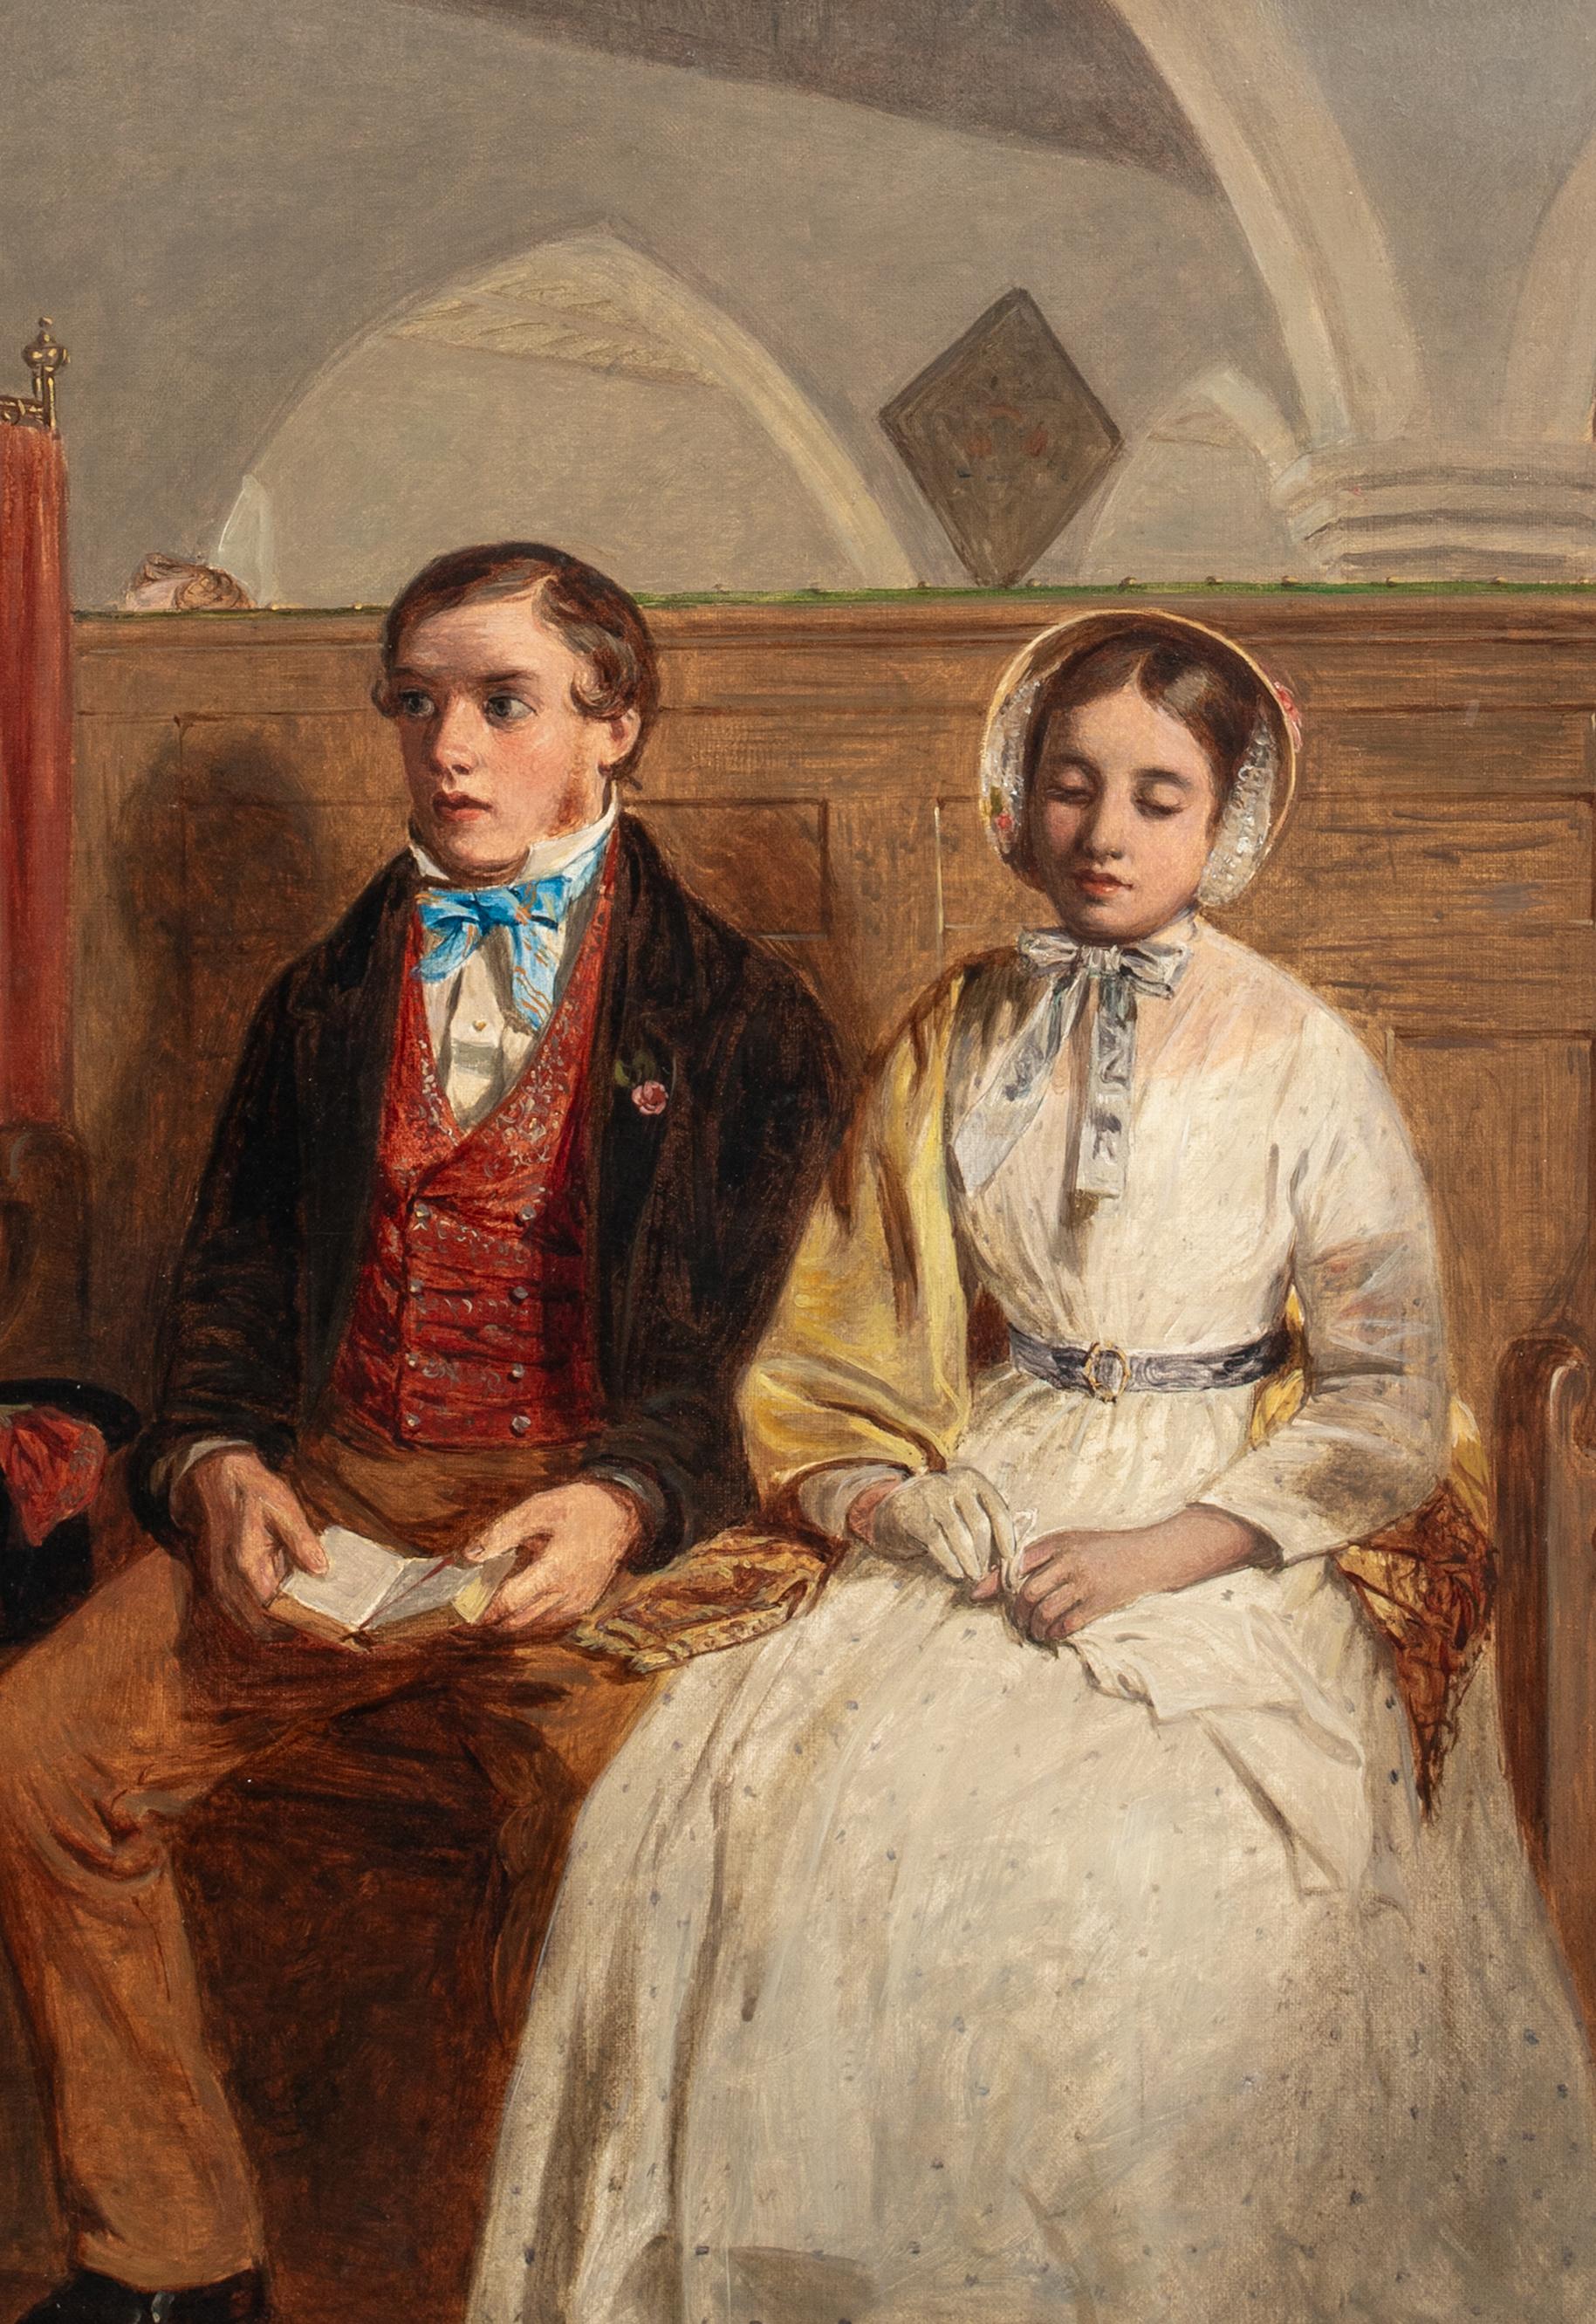 The First Time Of Asking, 19th Century 

by WILLIAM HEMSLEY (BRITISH 1817-1906) similar works to $25,000

Large 19th Century English church interior scene of young man and his fiancé, oil on canvas by William Hemsley. Beautiful church scene of the